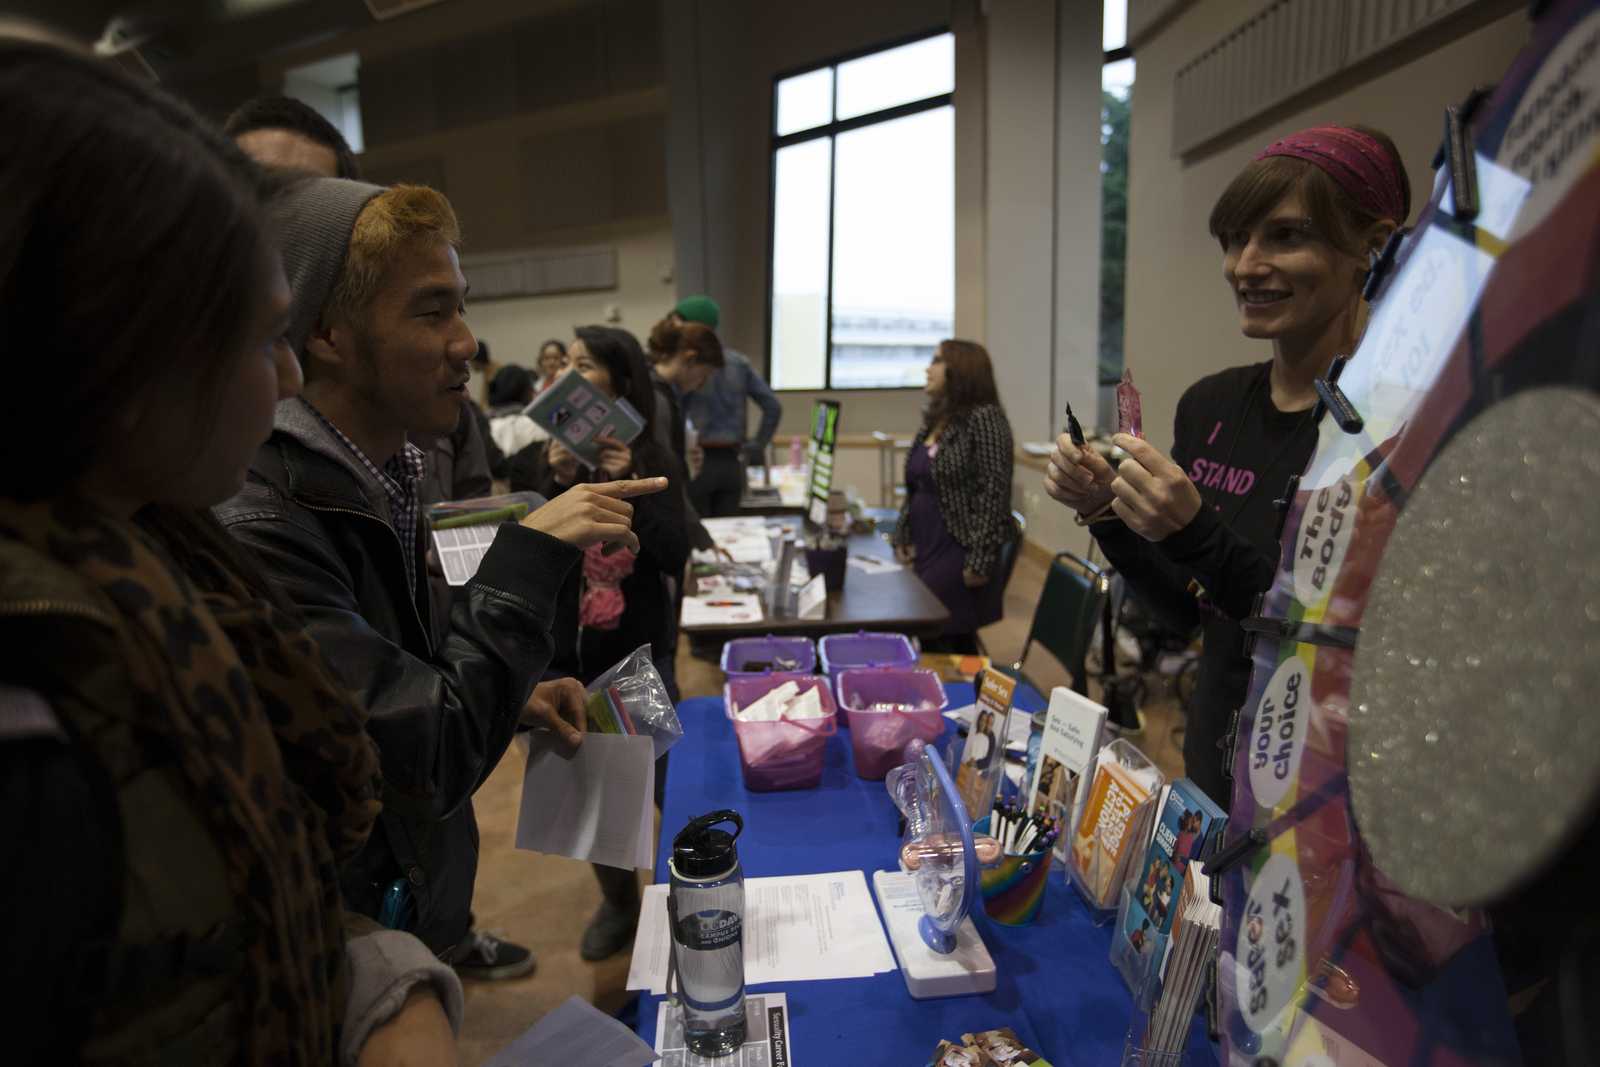 Josselyn Garcia (left) and Russell Lim (right) play a game with Planned Parenthood representative, Eb Troast (right), at the 5th annual Sexuality Career Fair on Nov. 19, 2013. The fair, held at SF State's Jack Adams Hall, was hosted by Educational and Referral Organization for Sexuality, or EROS. Photo by Dariel Medina / Xpress